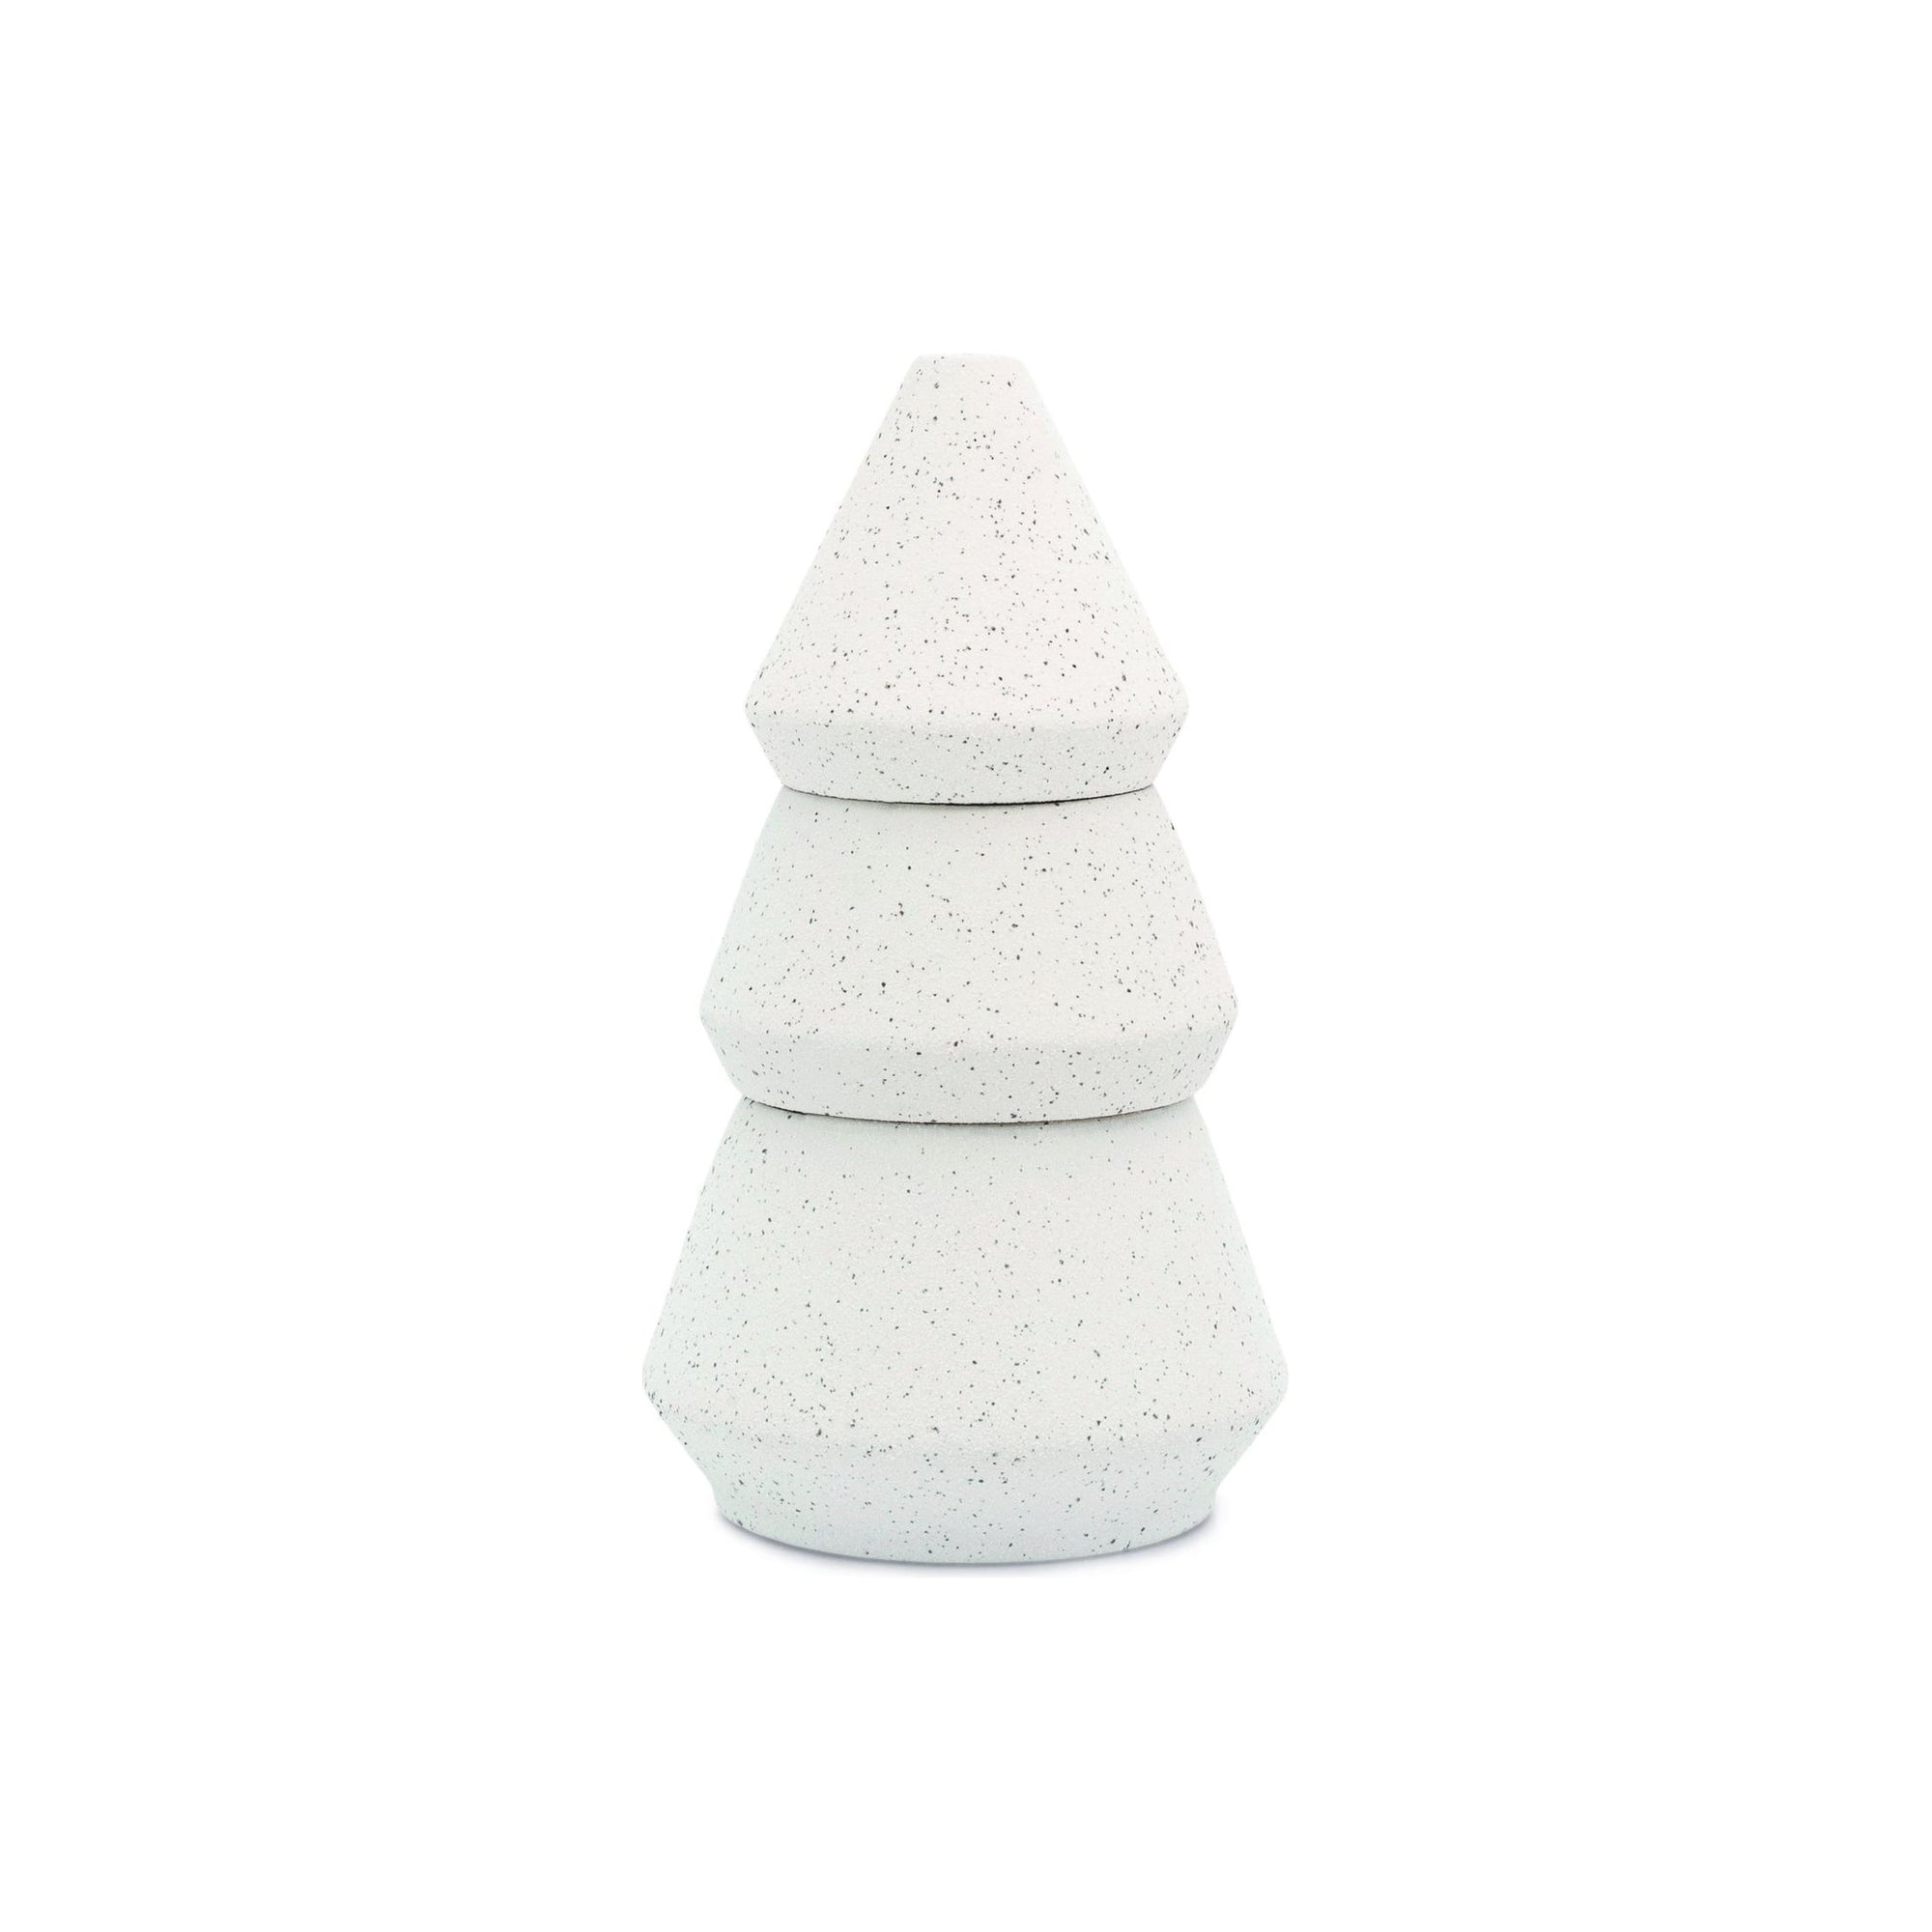 Cypress & Fir: Stacked Tree - White